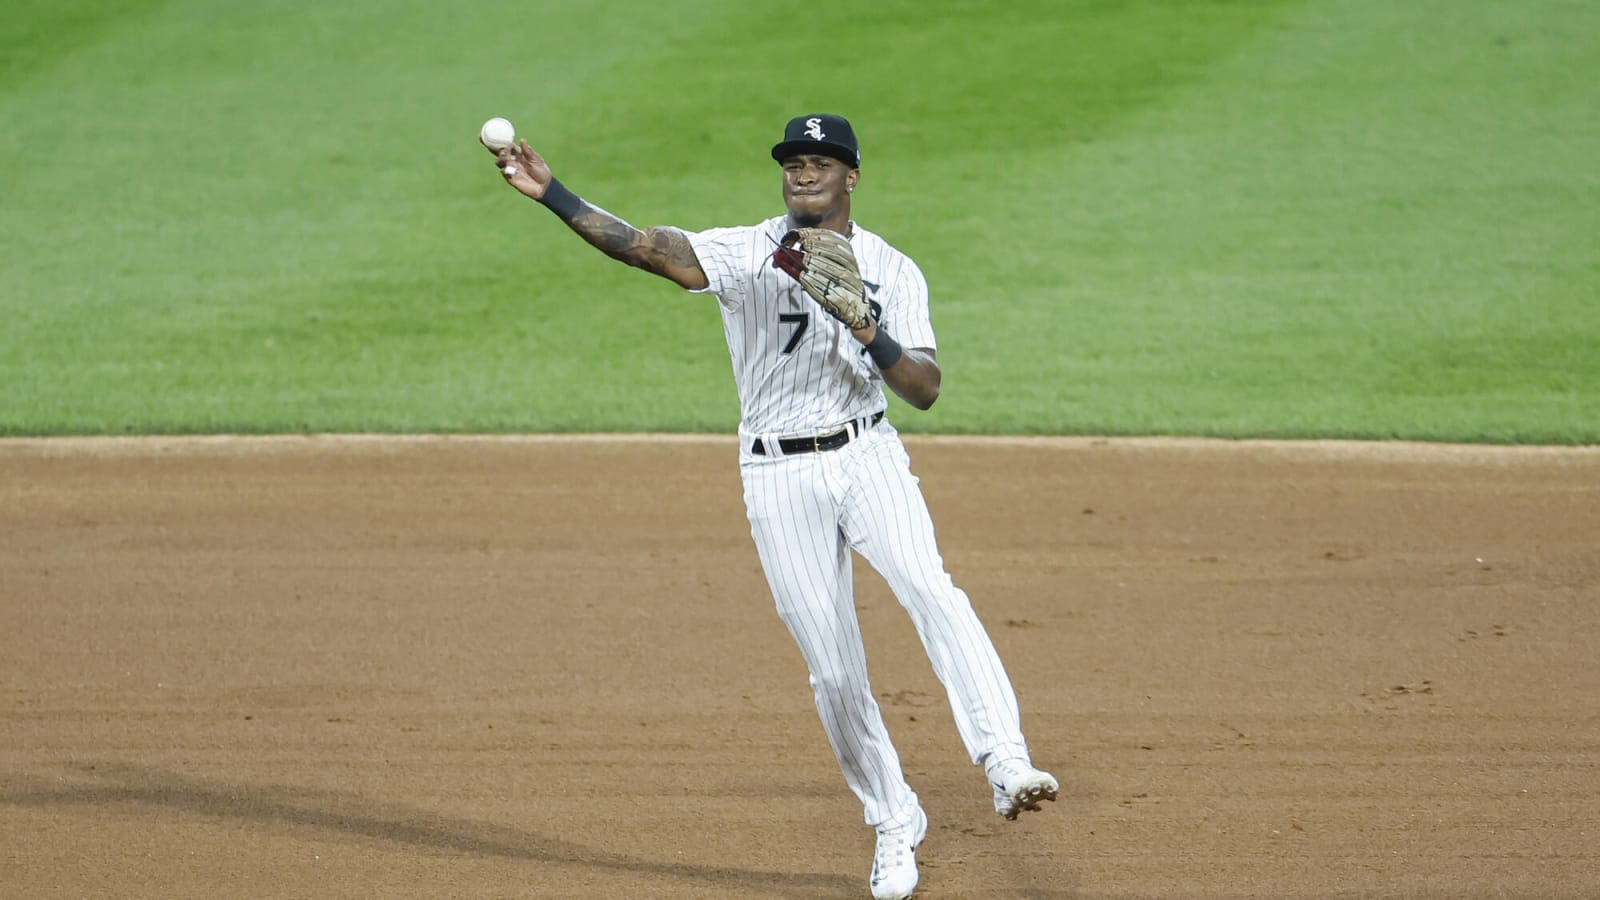  Tim Anderson Could Be A Target To Fill Infield Need